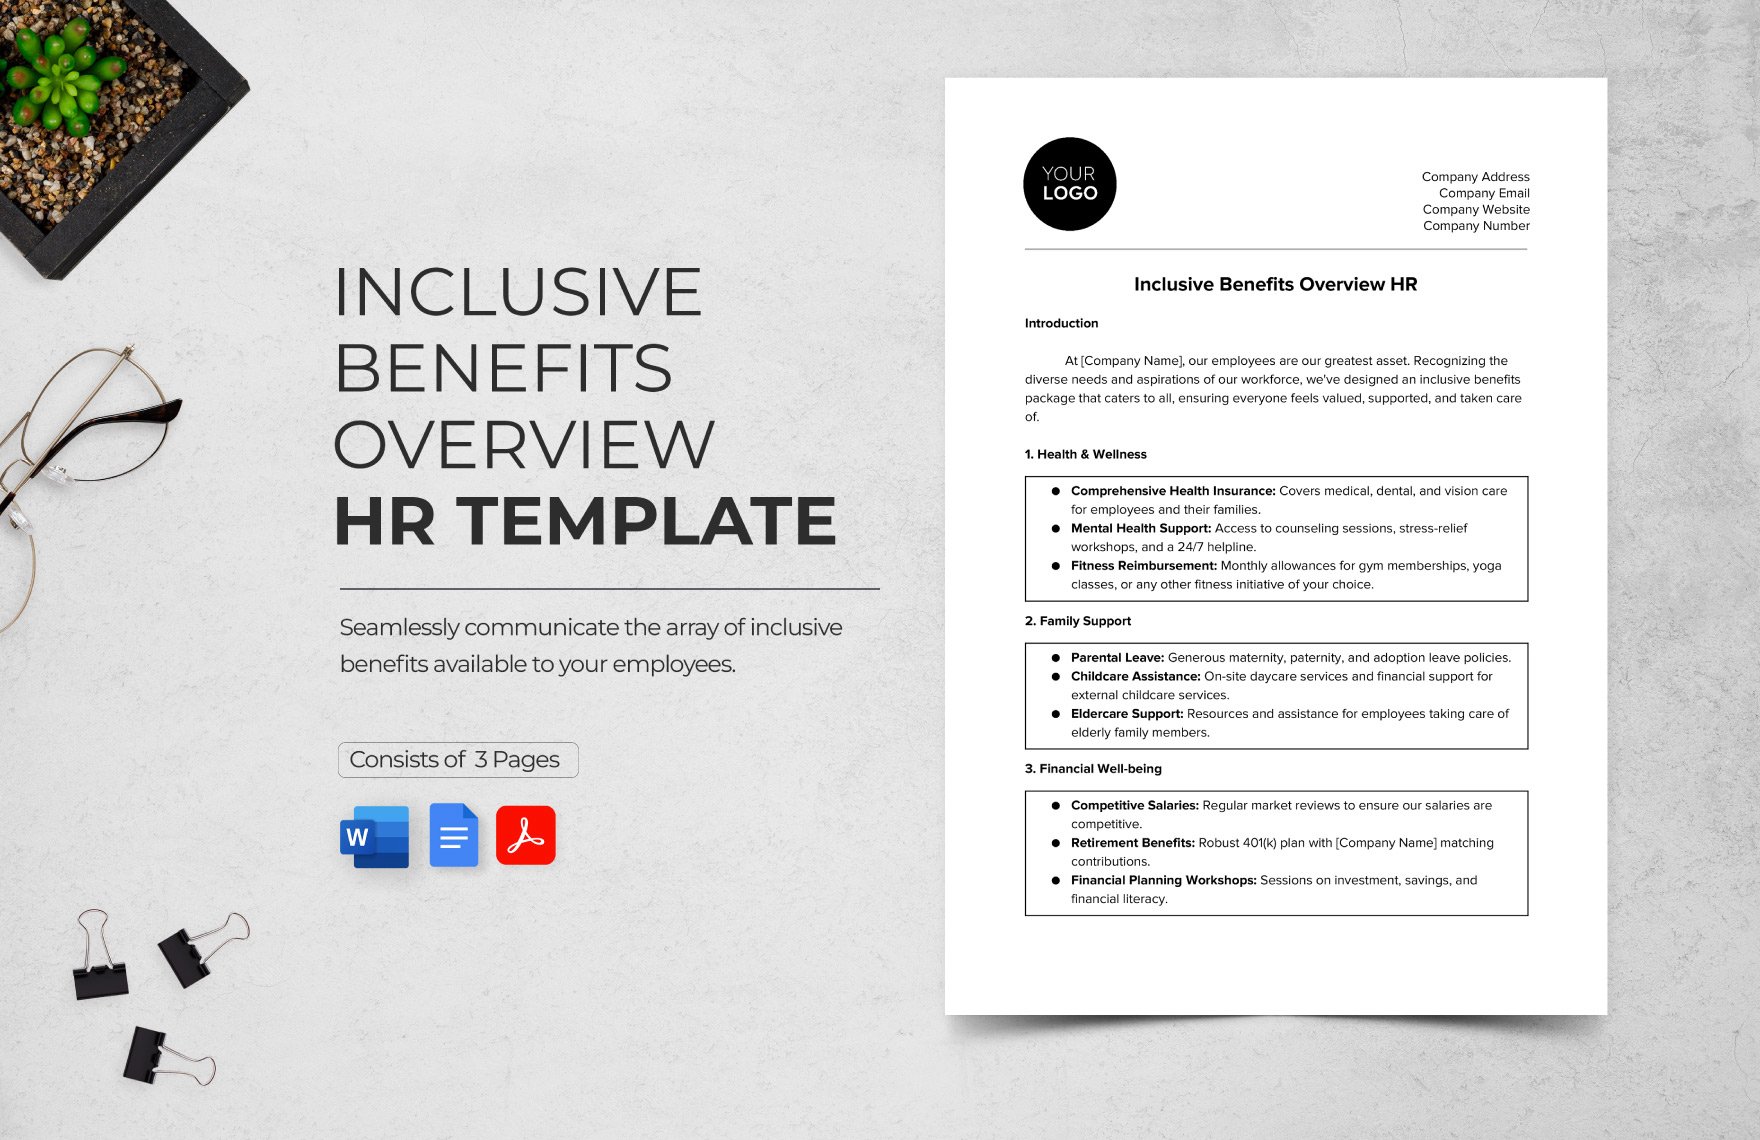 Inclusive Benefits Overview HR Template